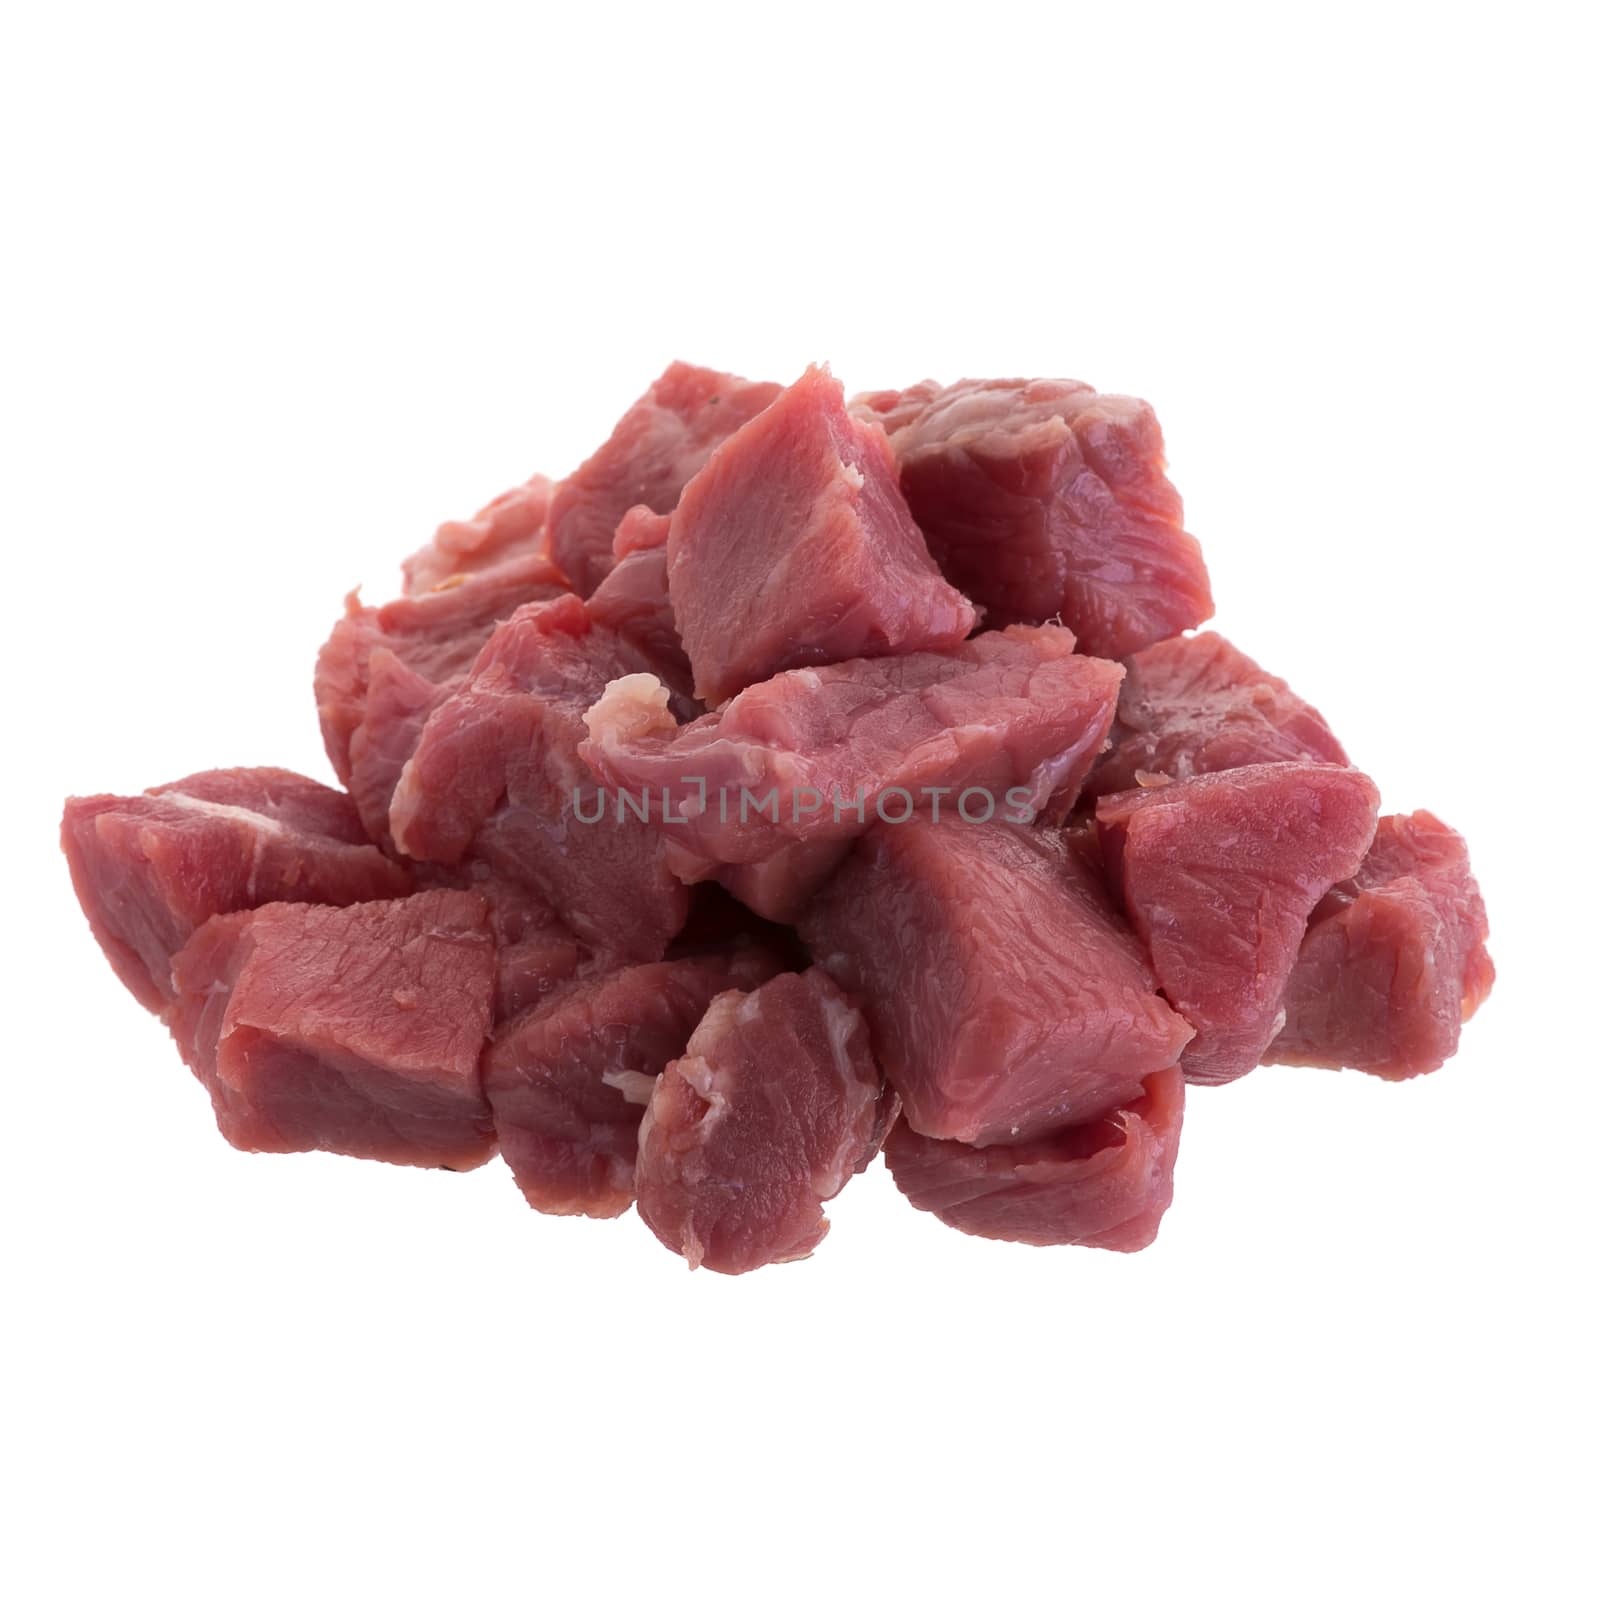 fresh raw beef cubes isolated on white background.